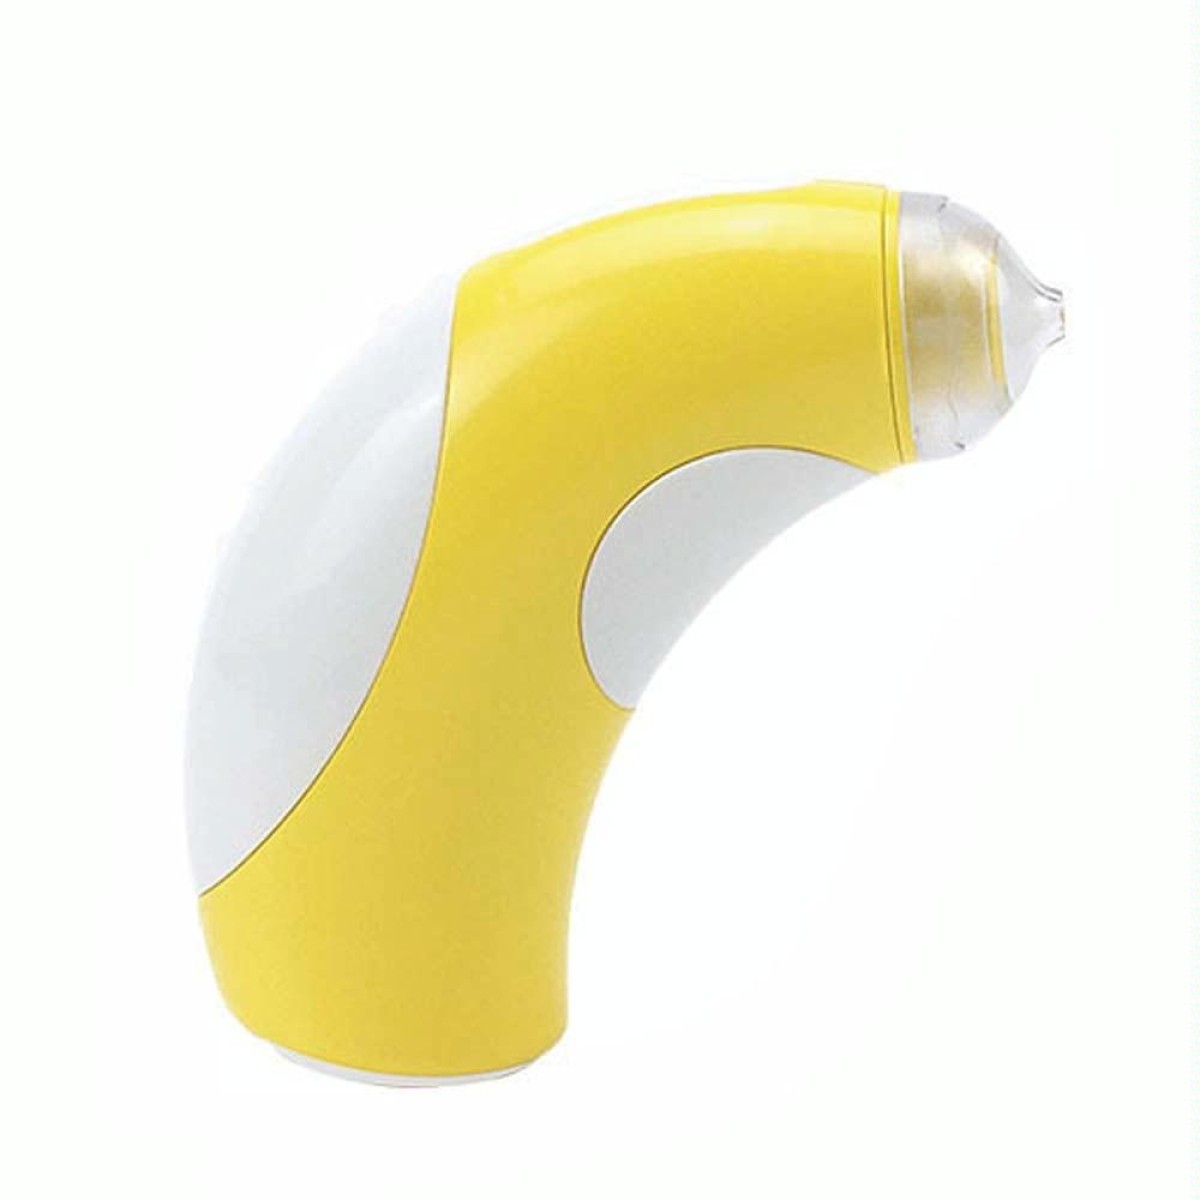 Remover Blackhead Pore Acne Cleaning Instrument(Yellow)